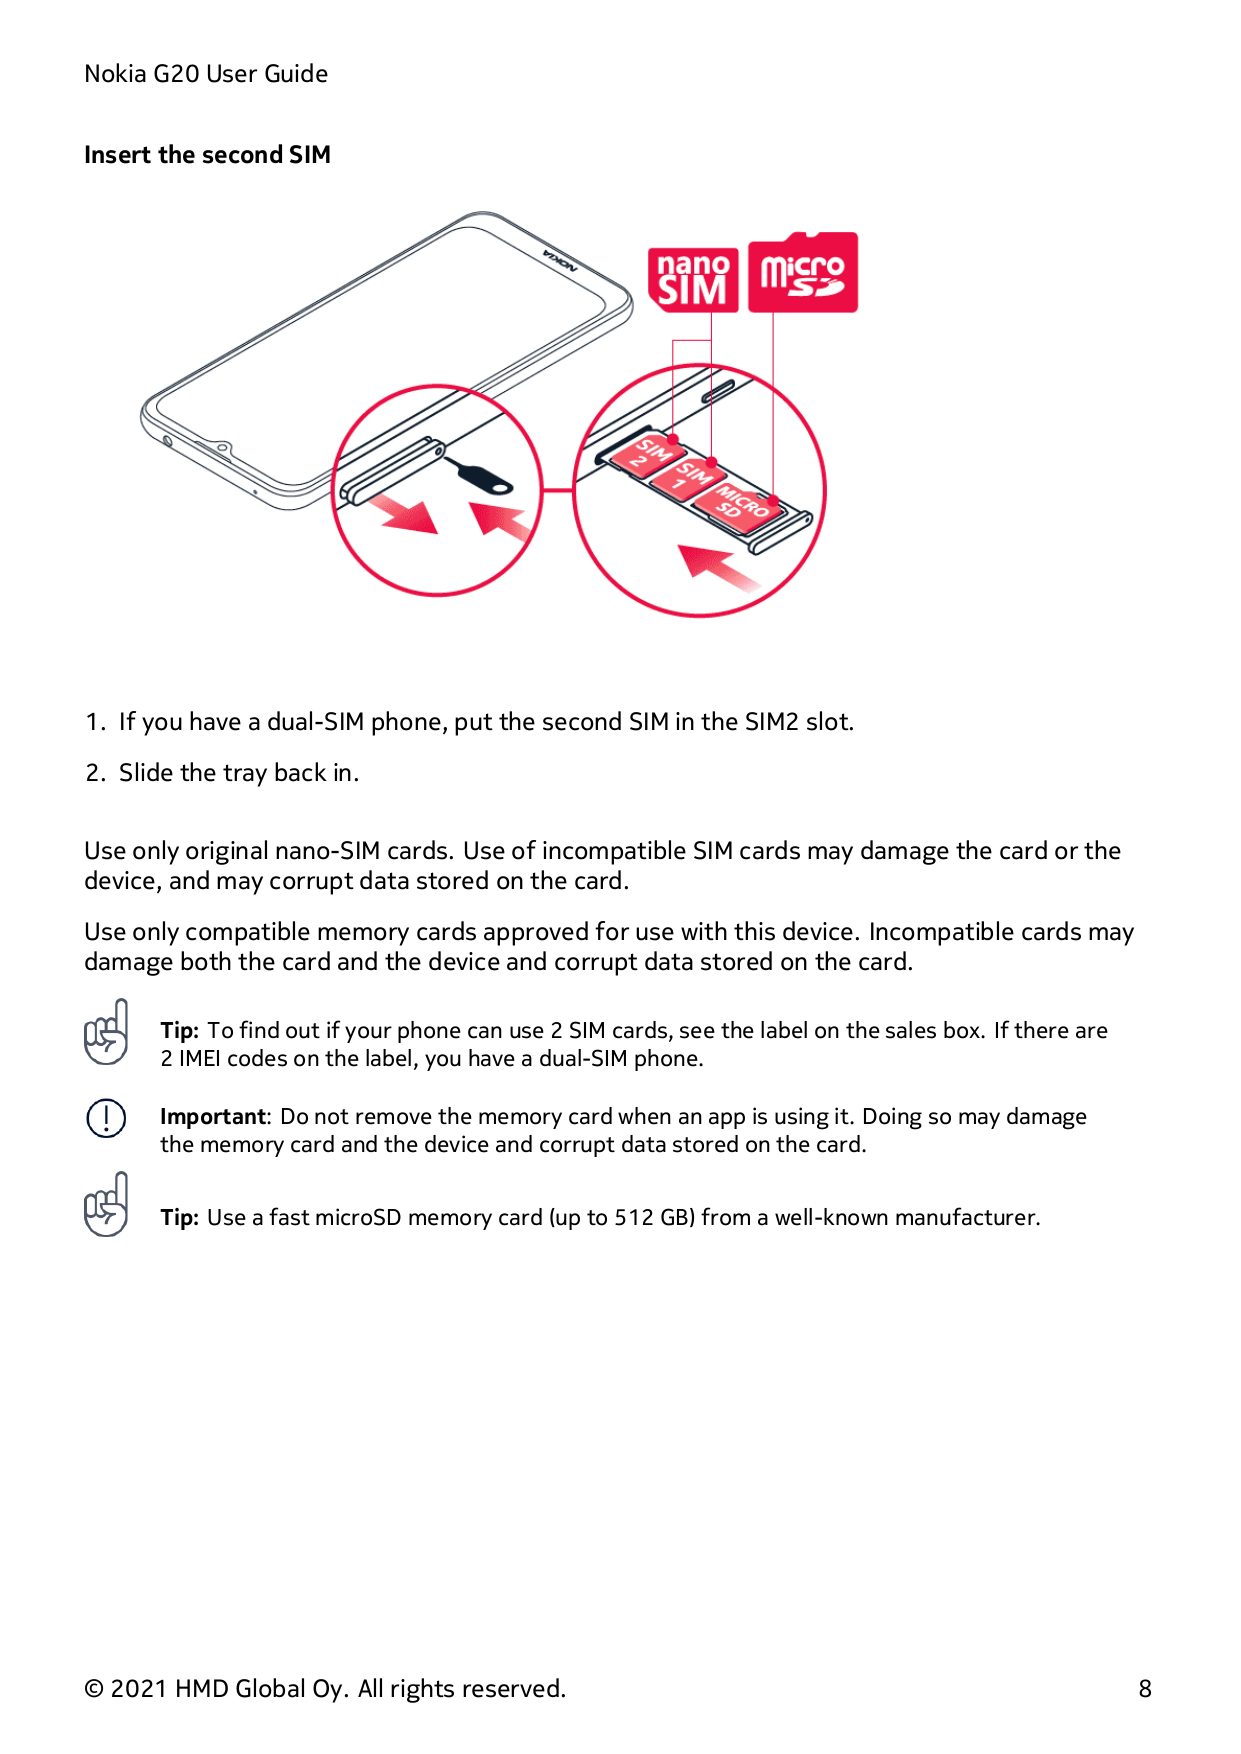 Nokia G20 User GuideInsert the second SIM1. If you have a dual-SIM phone, put the second SIM in the SIM2 slot.2. Slide the tray 